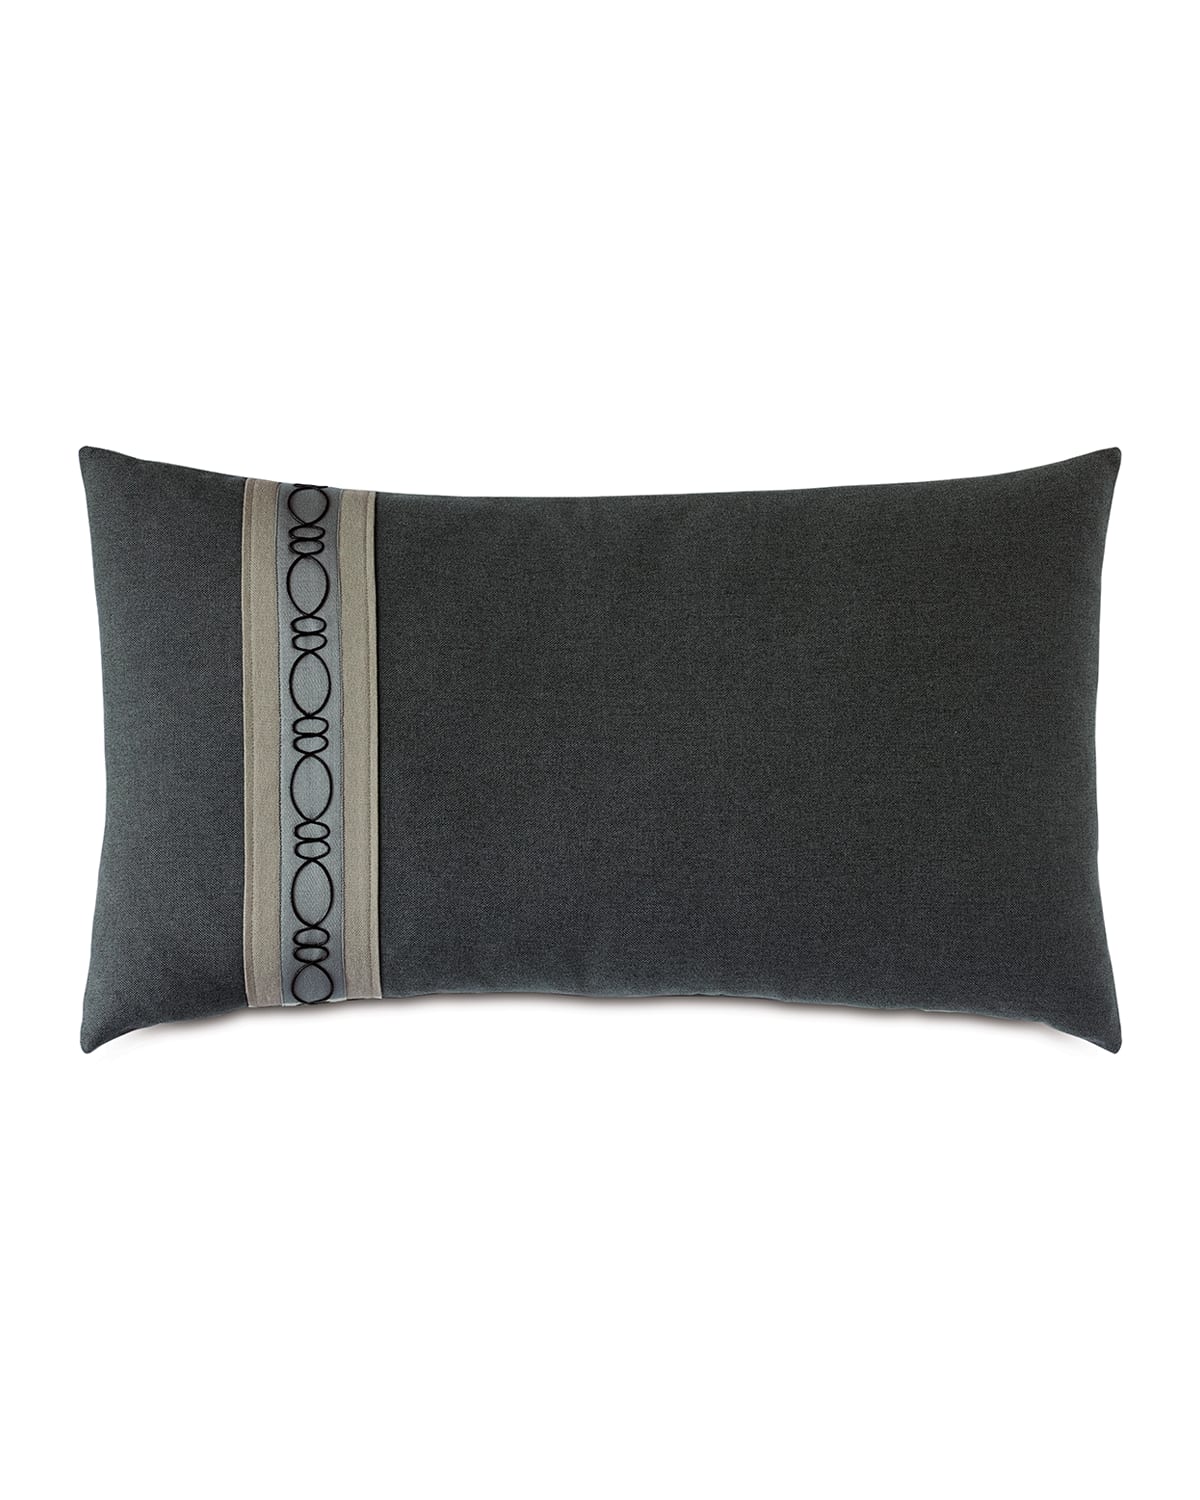 Shop Eastern Accents Kilbourn King Left Sham In Charcoal